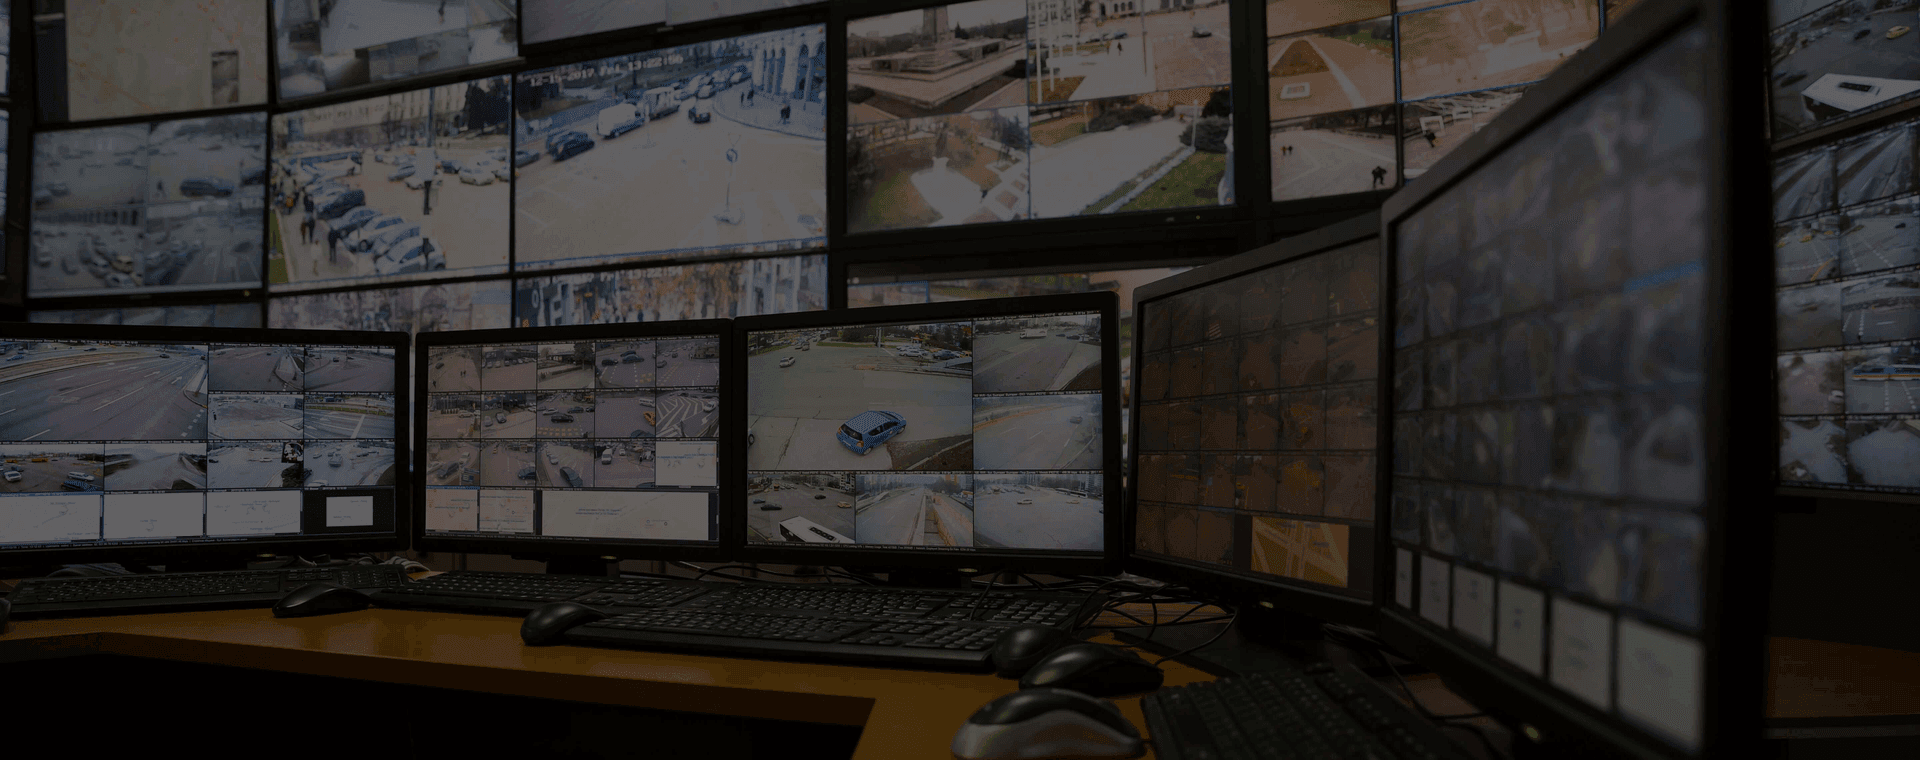 How AI Video Analytics Help Video Monitoring
Centers Save Money